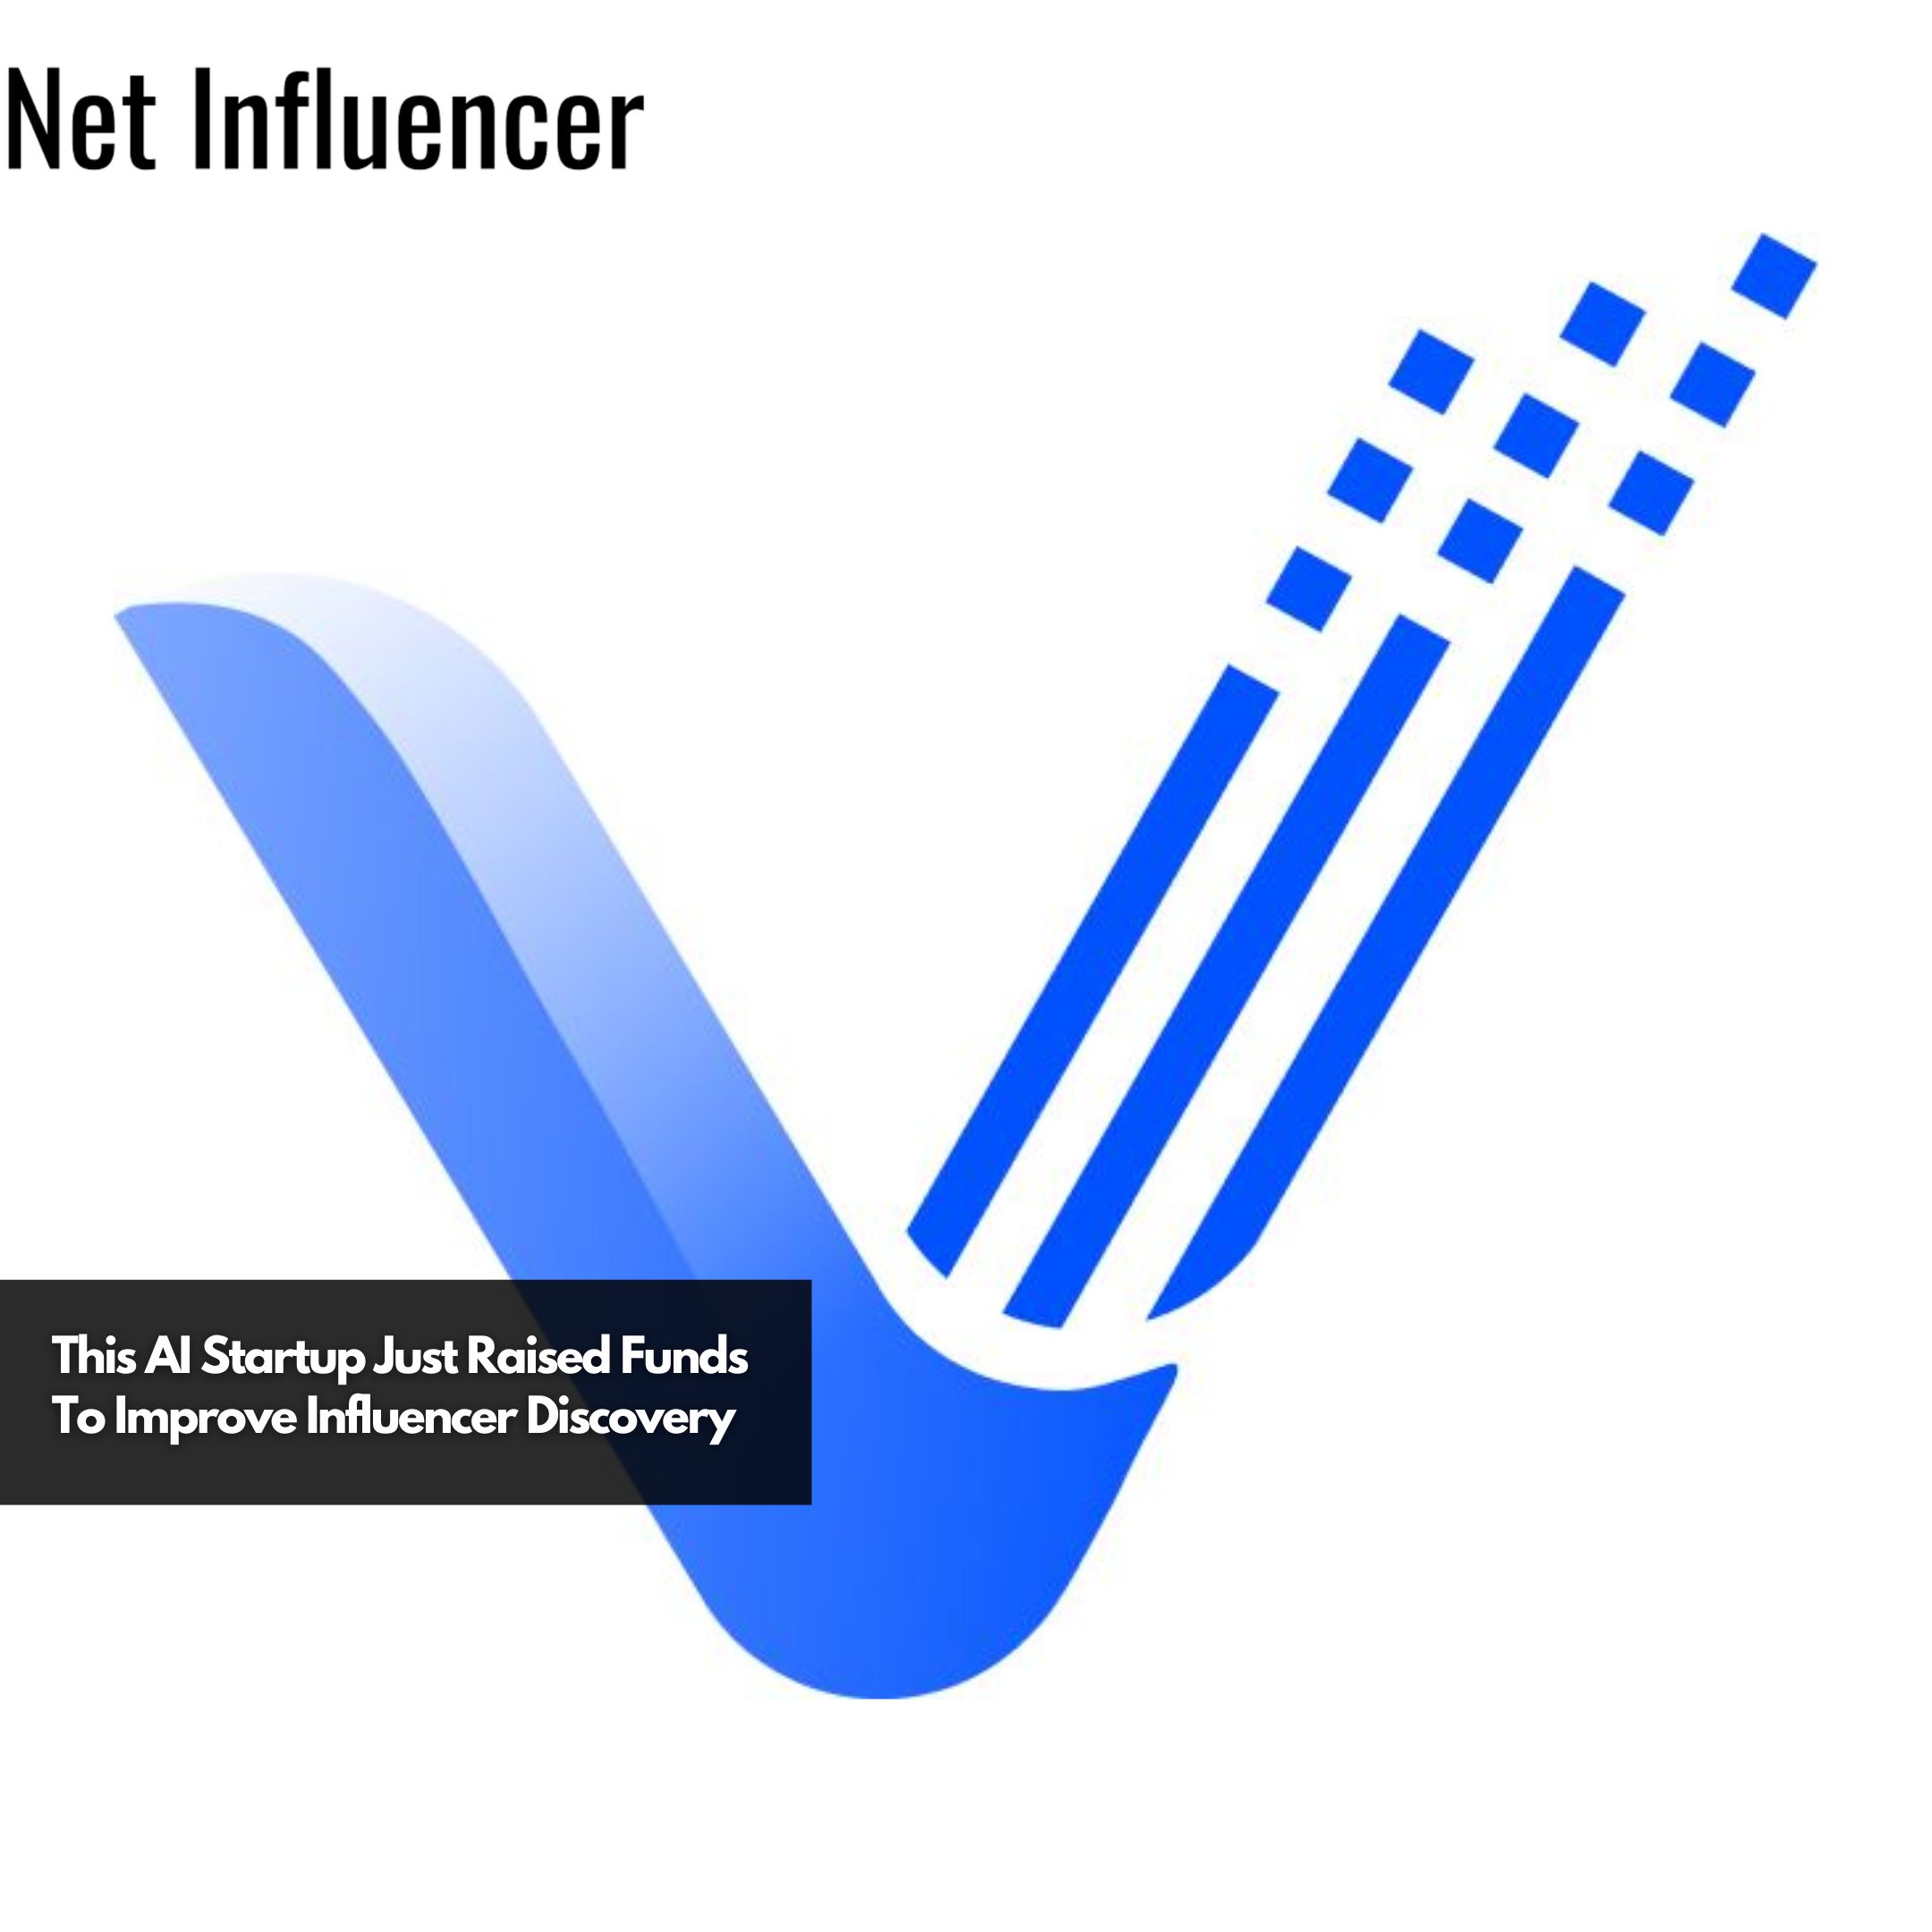 This AI Startup Just Raised Funds To Improve Influencer Discovery